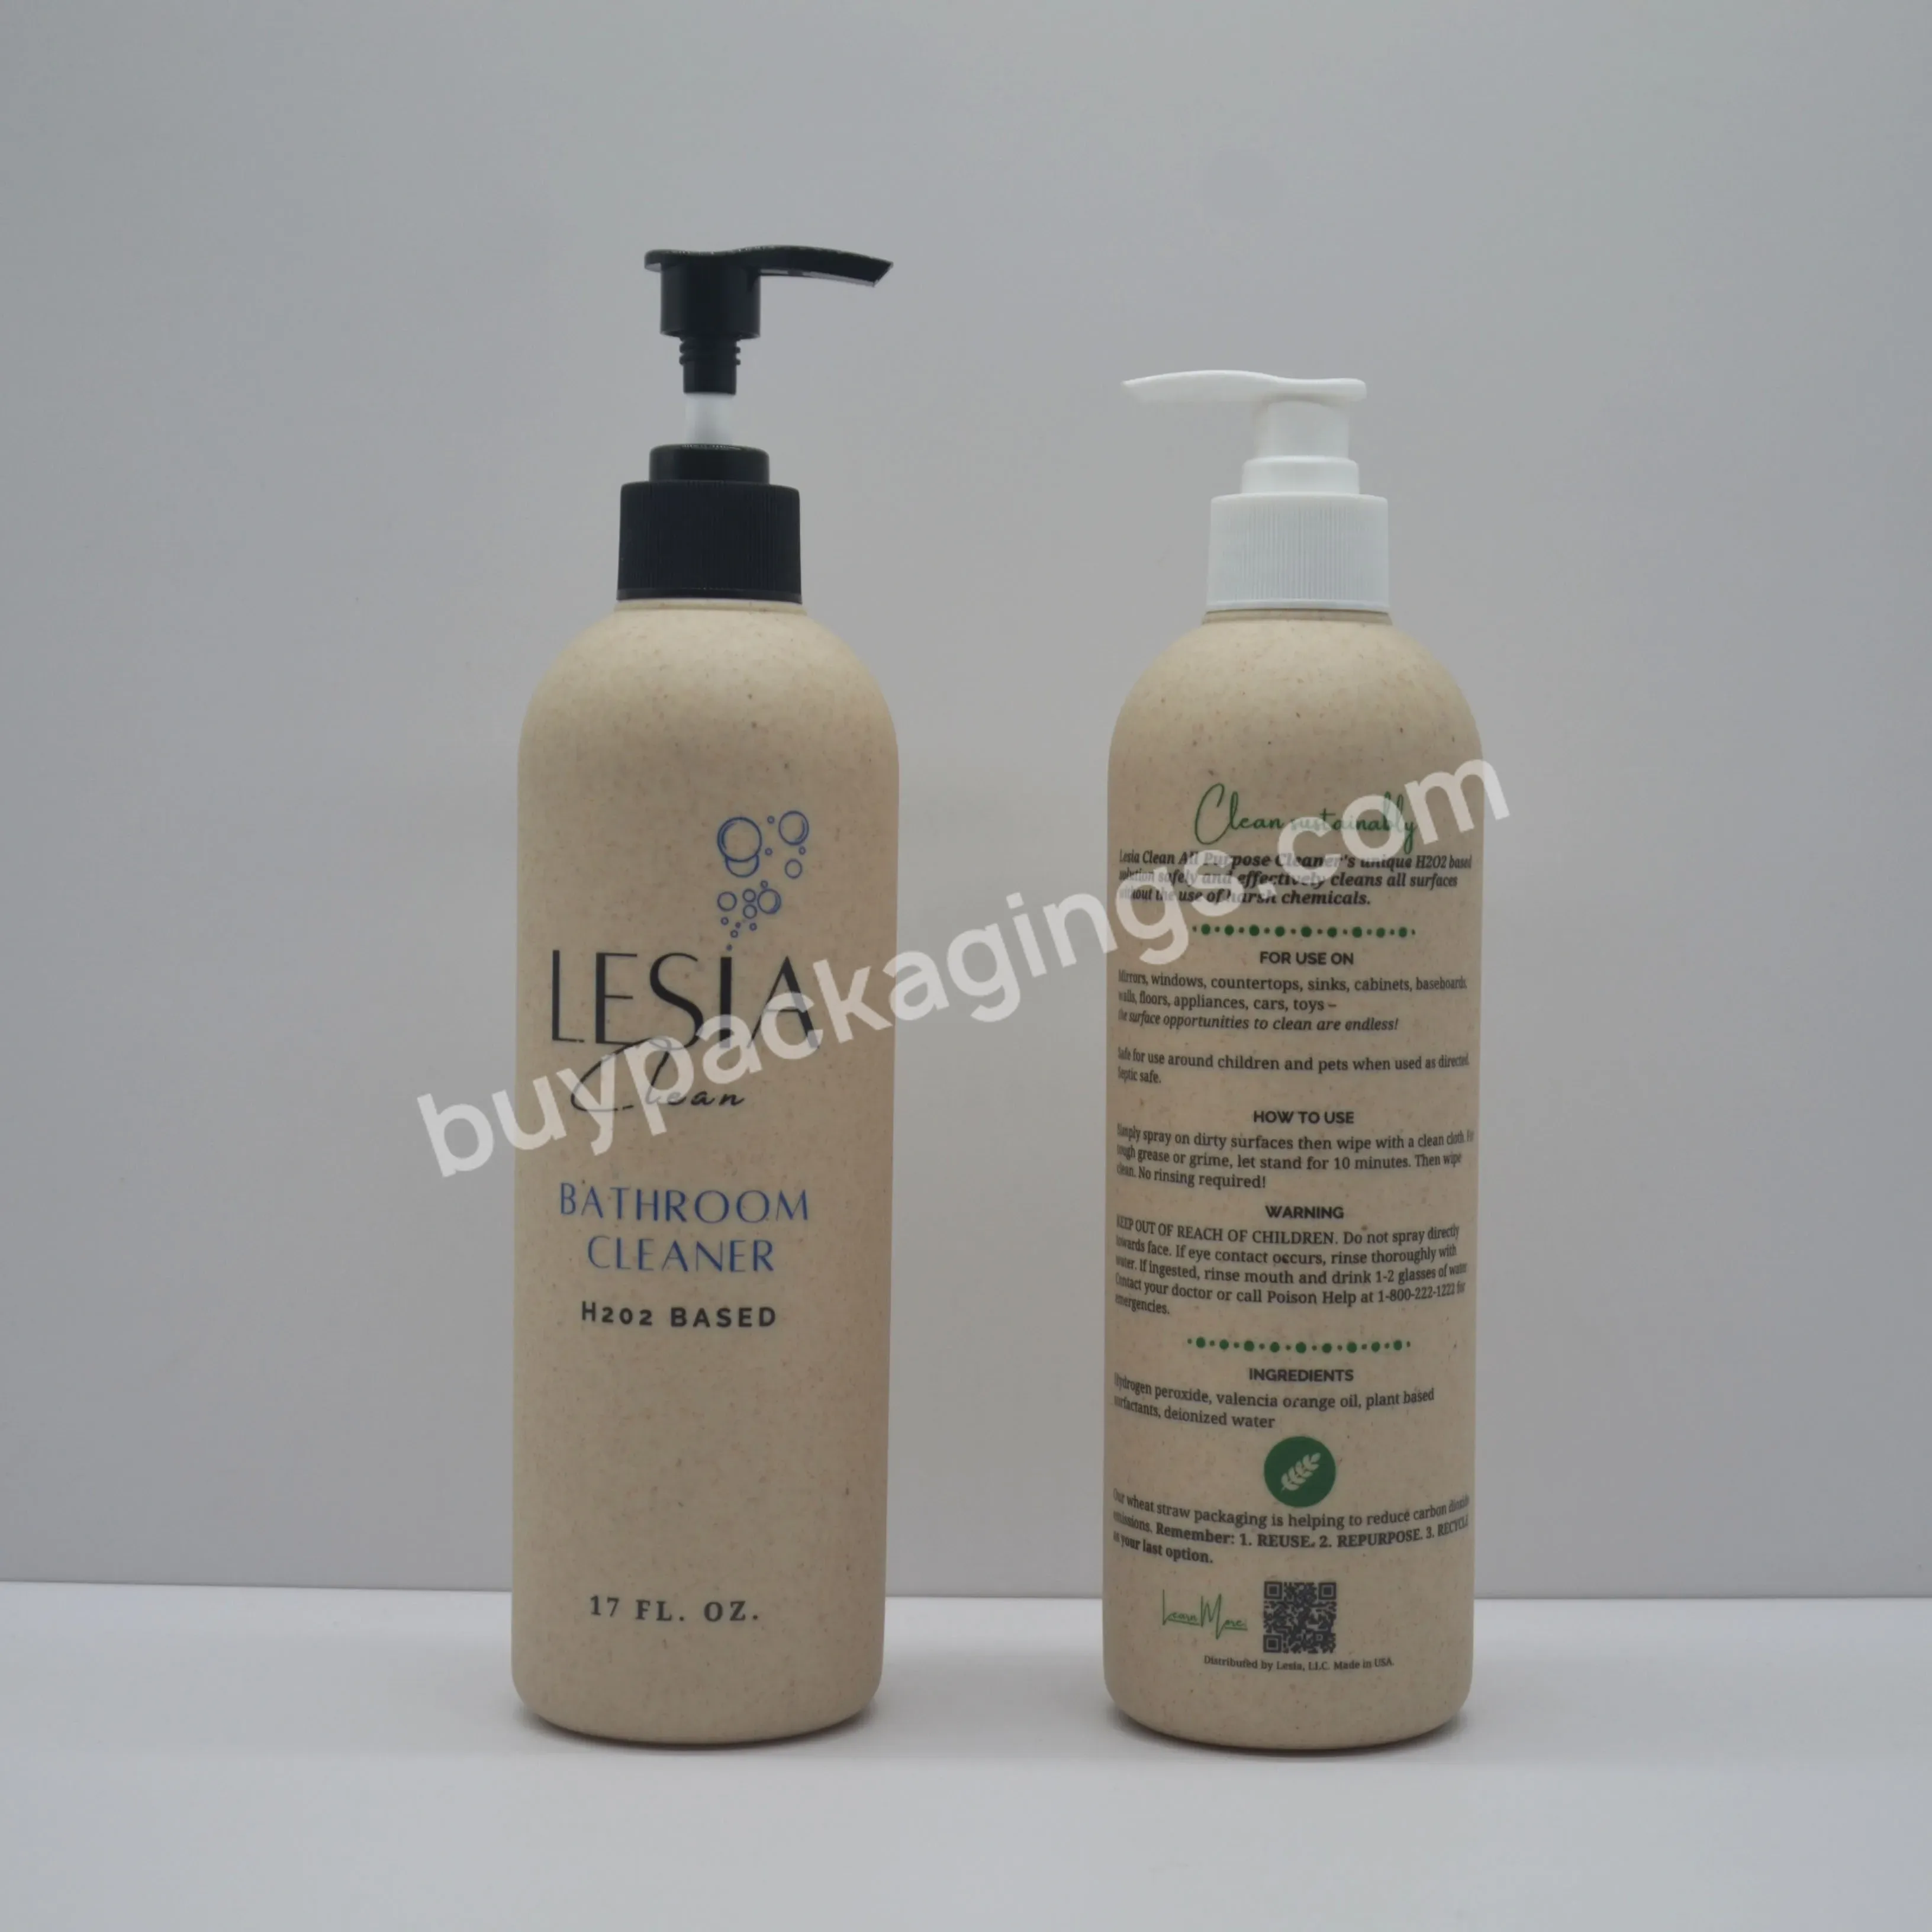 Pump Spray Shampoo Bottle Biodegradable Cosmetics Packaging Wholesale Production Of Wheat Straw Plastic Eco-friendly Versailles - Buy Labels For Cosmetic Bottles Shampoo Bottle 400ml Shampoo Bottle Lotion Bottle Pastel Color Shampoo Bottles Luxury Sh